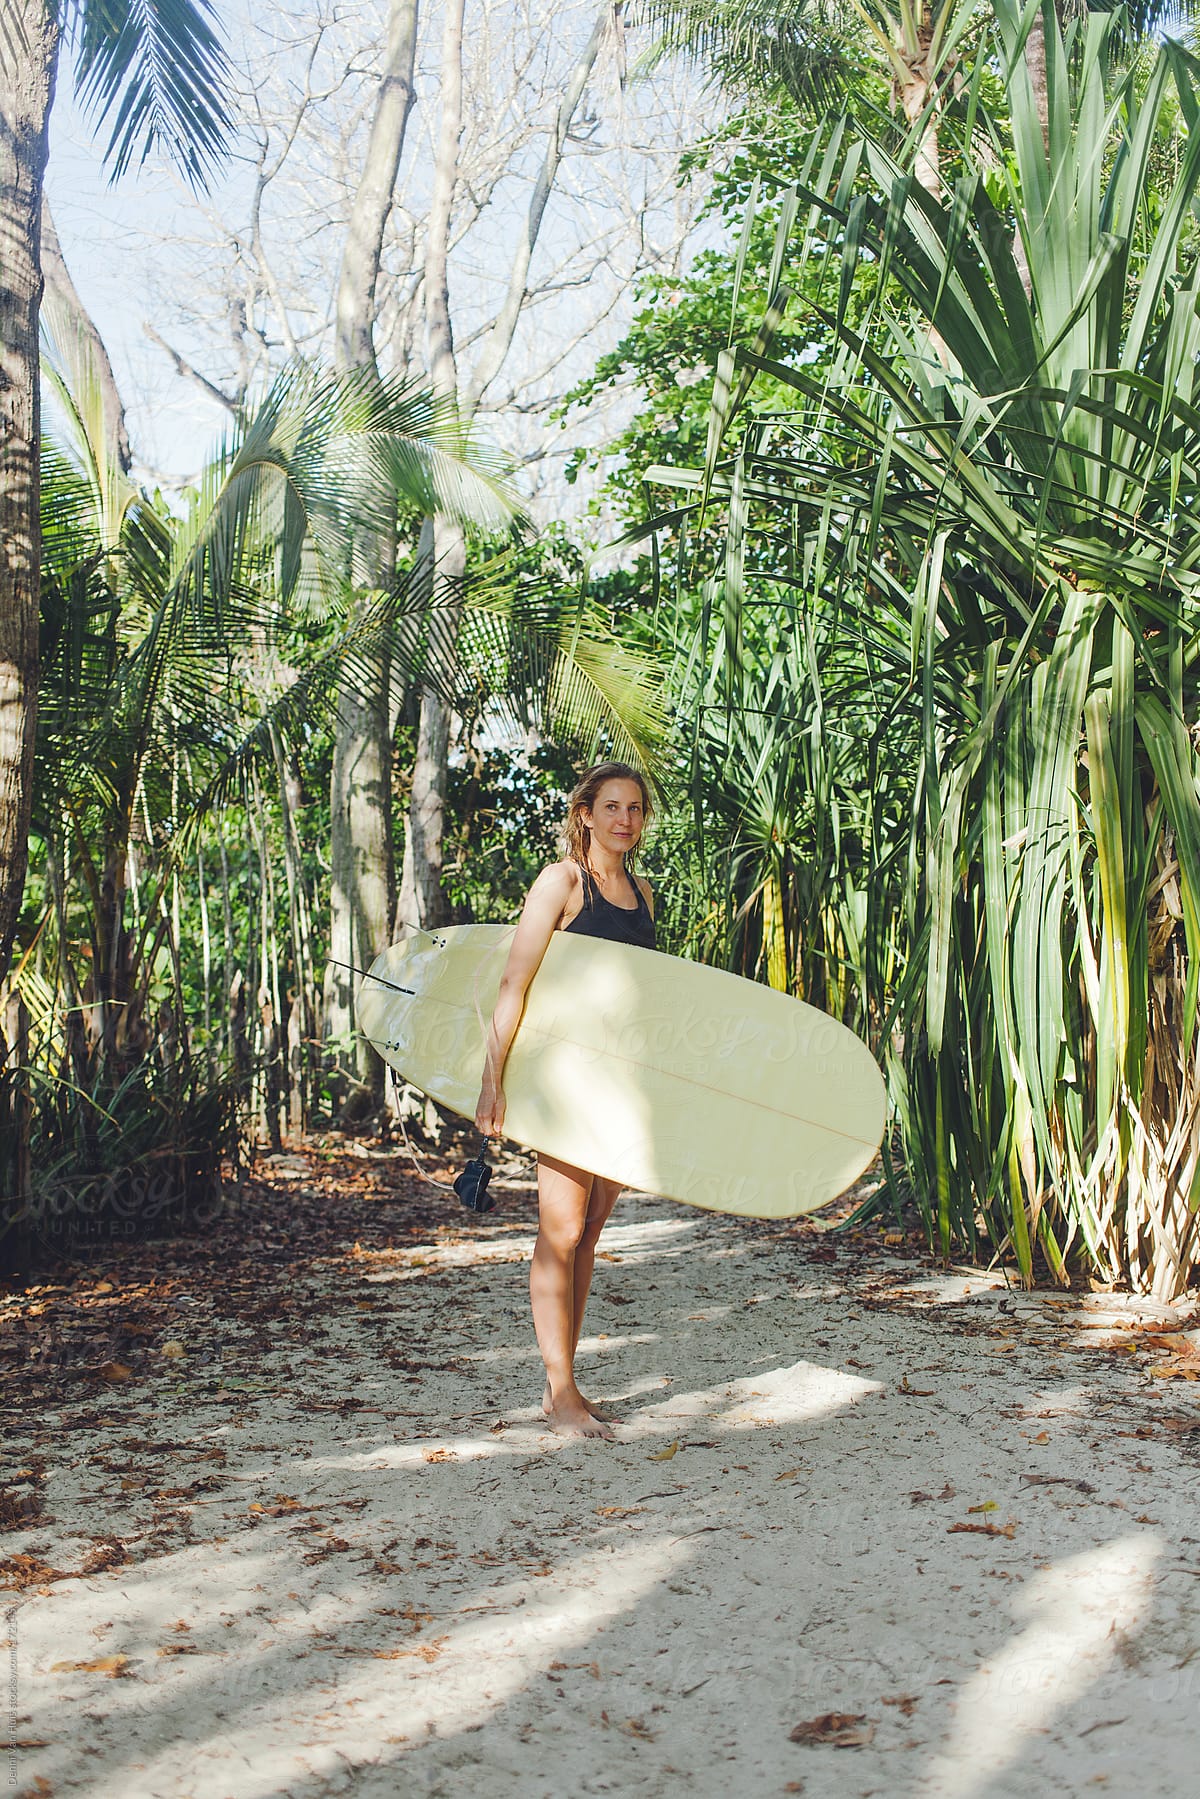 Heathy woman holding her surfboard on her way to the beach to go surfing.